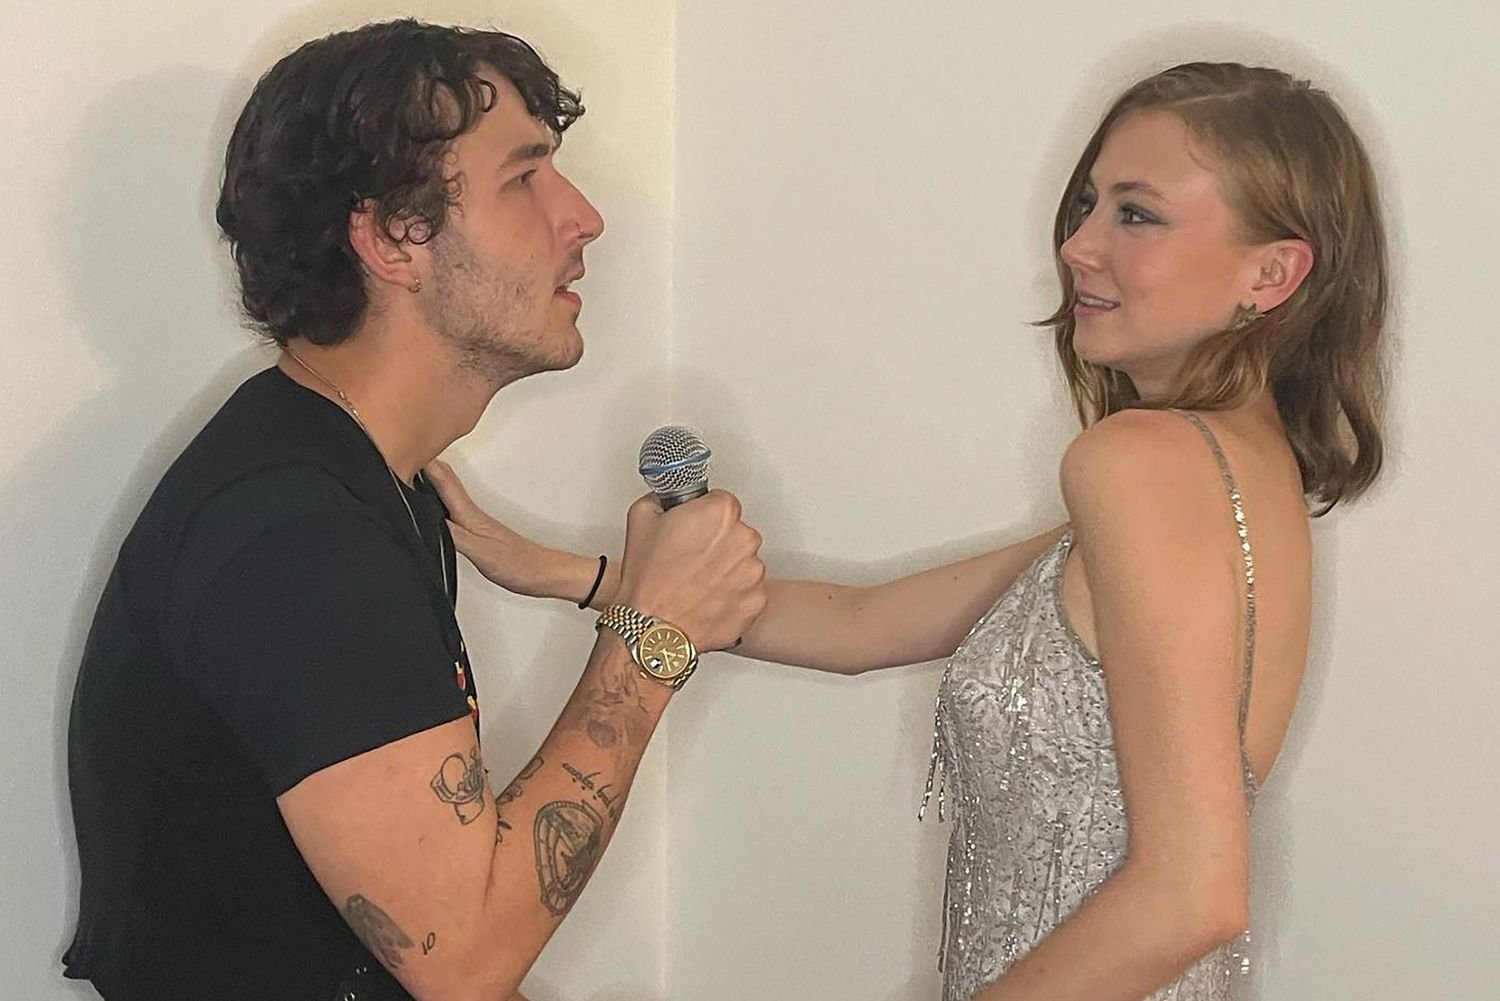 For Halloween, Frankie Jonas and His Girlfriend Dress as Joe and His Ex-Girlfriend Taylor Swift, Poking Fun at Them